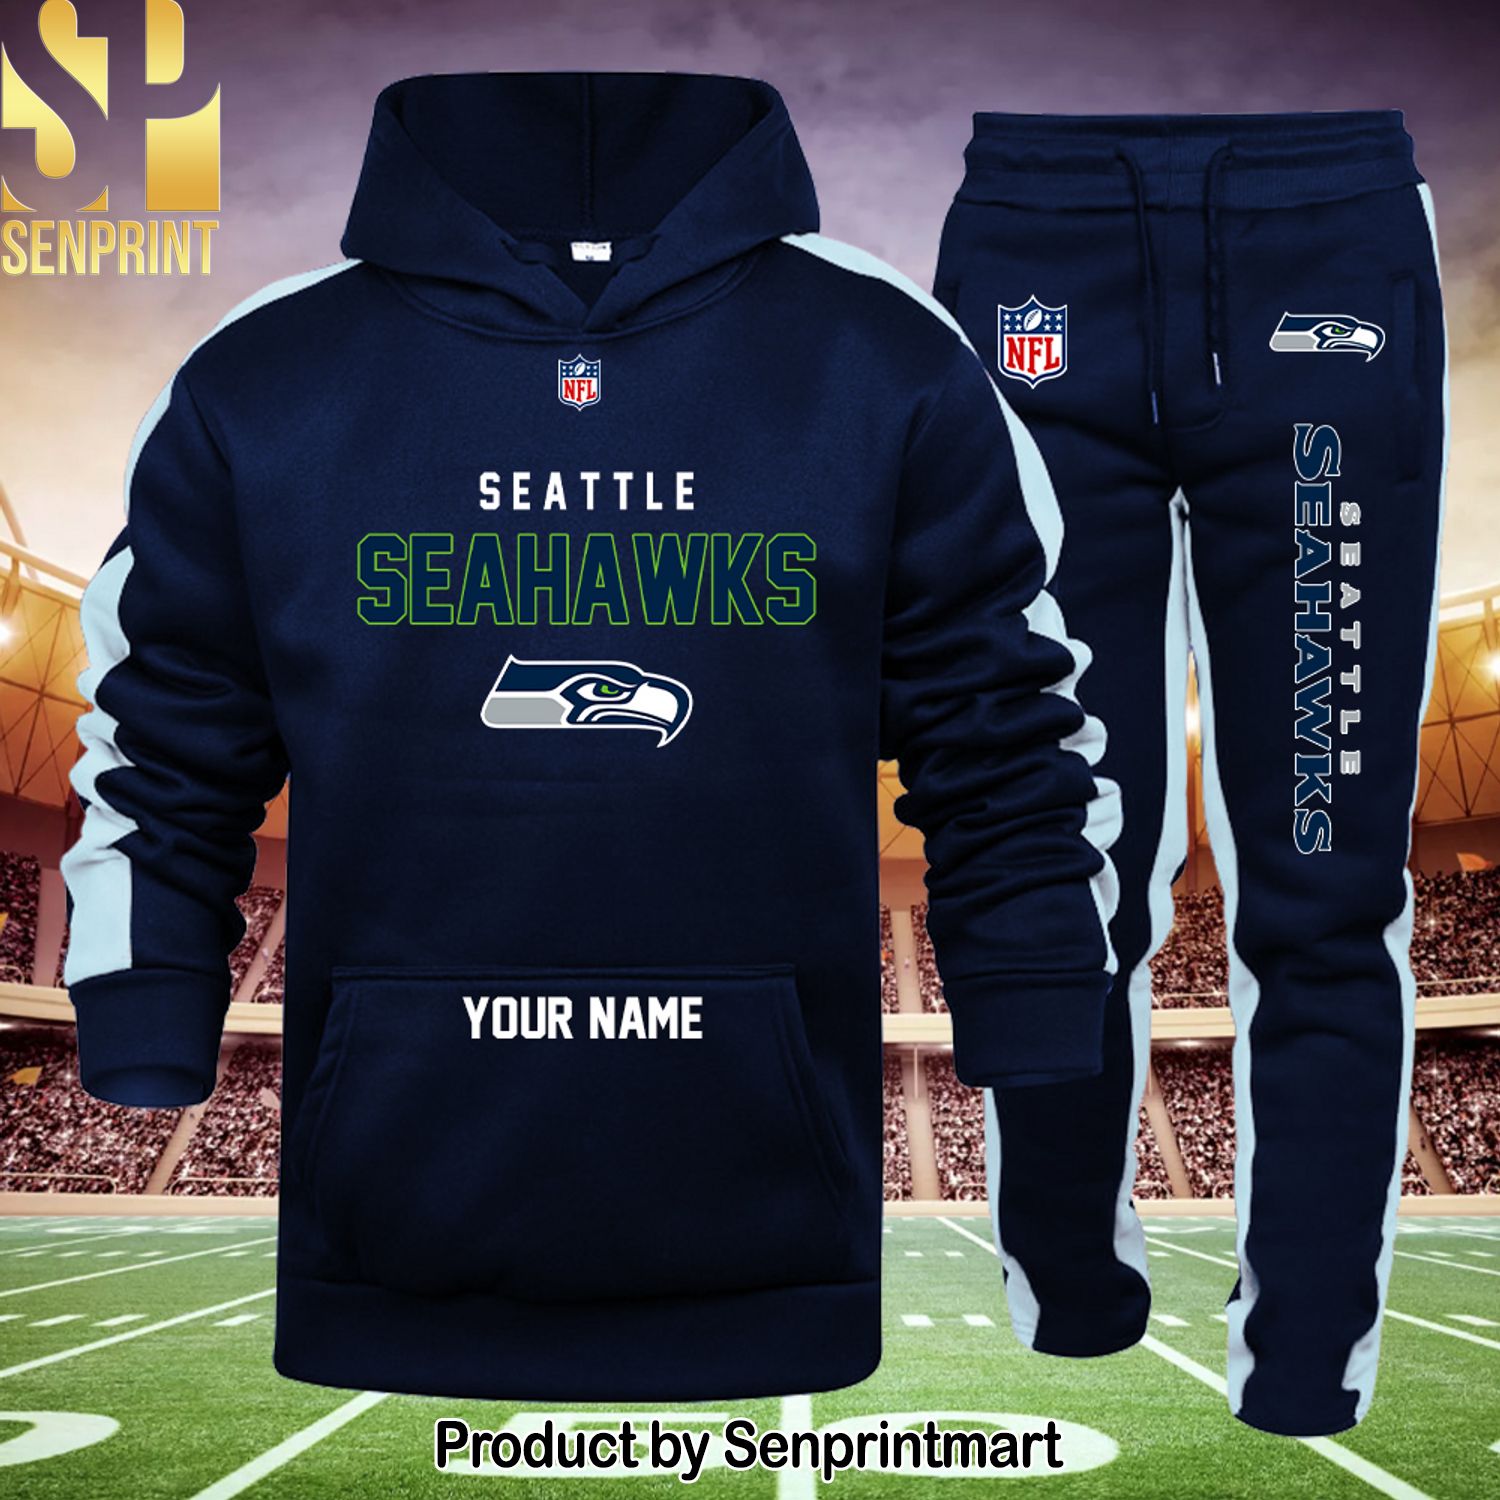 NFL Seattle Seahawks Hot Version All Over Printed Shirt and Sweatpants